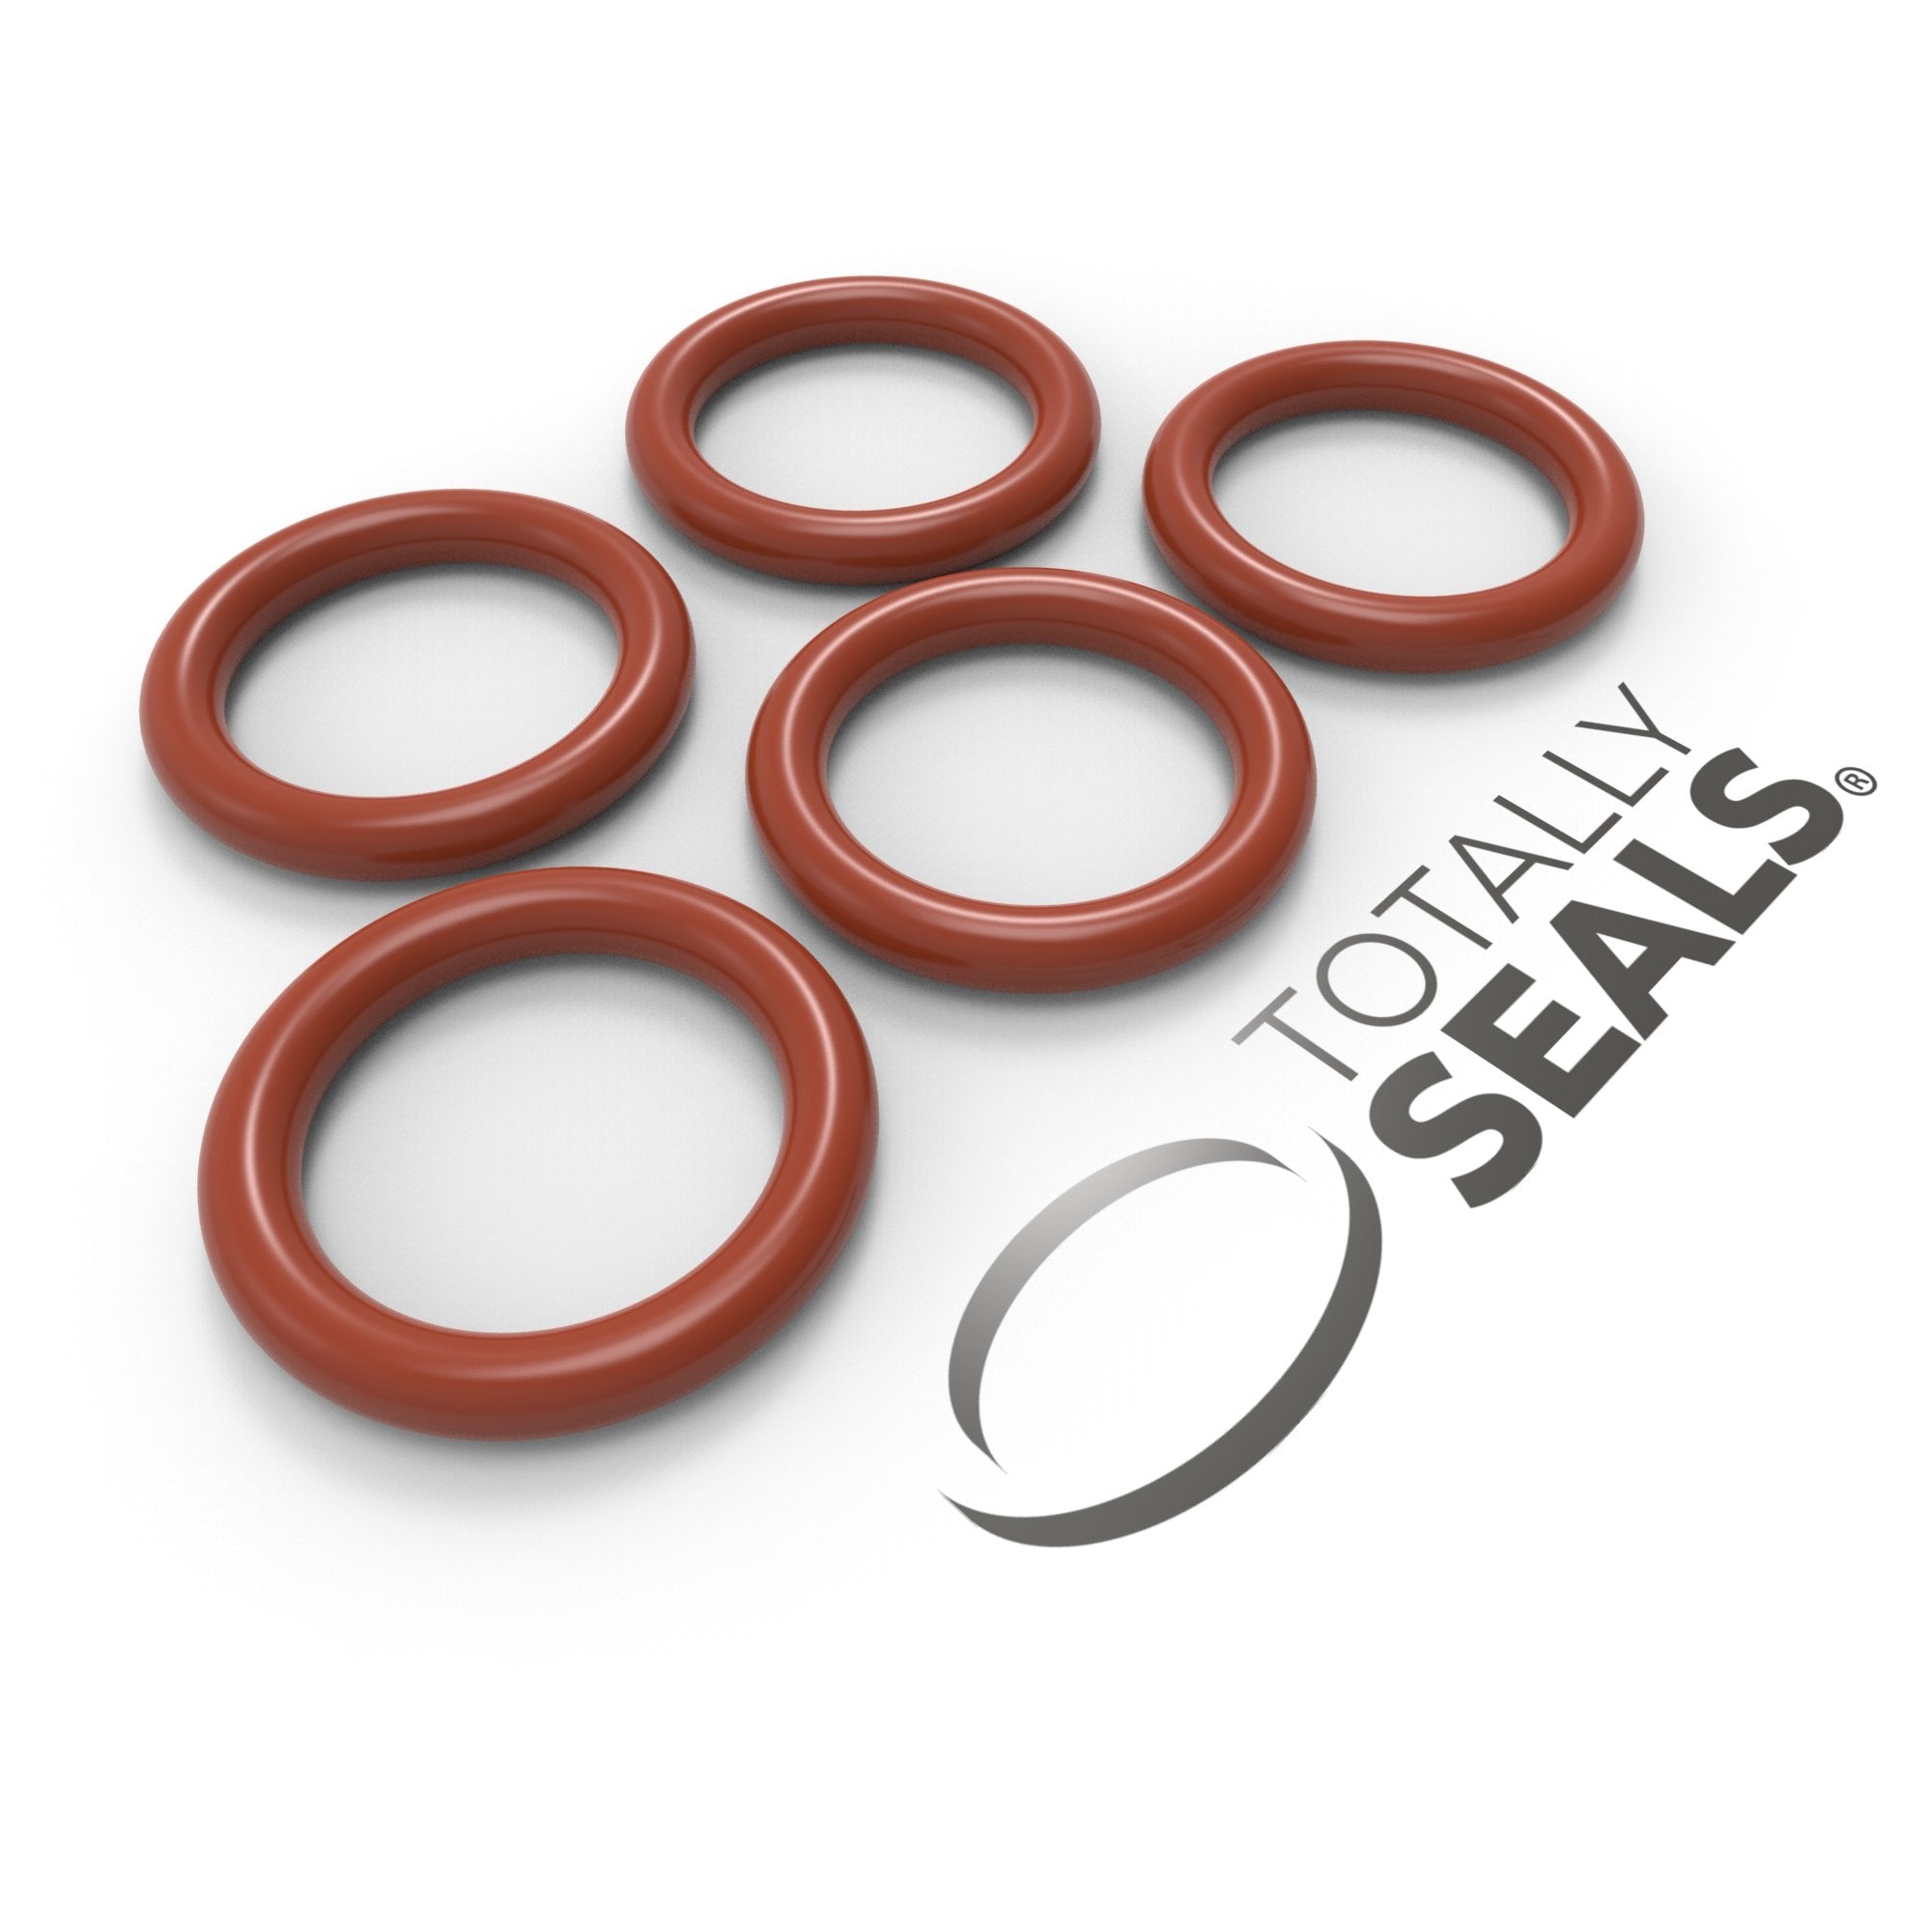 12mm x 2.5mm (17mm OD) Silicone O-Rings – Totally Seals